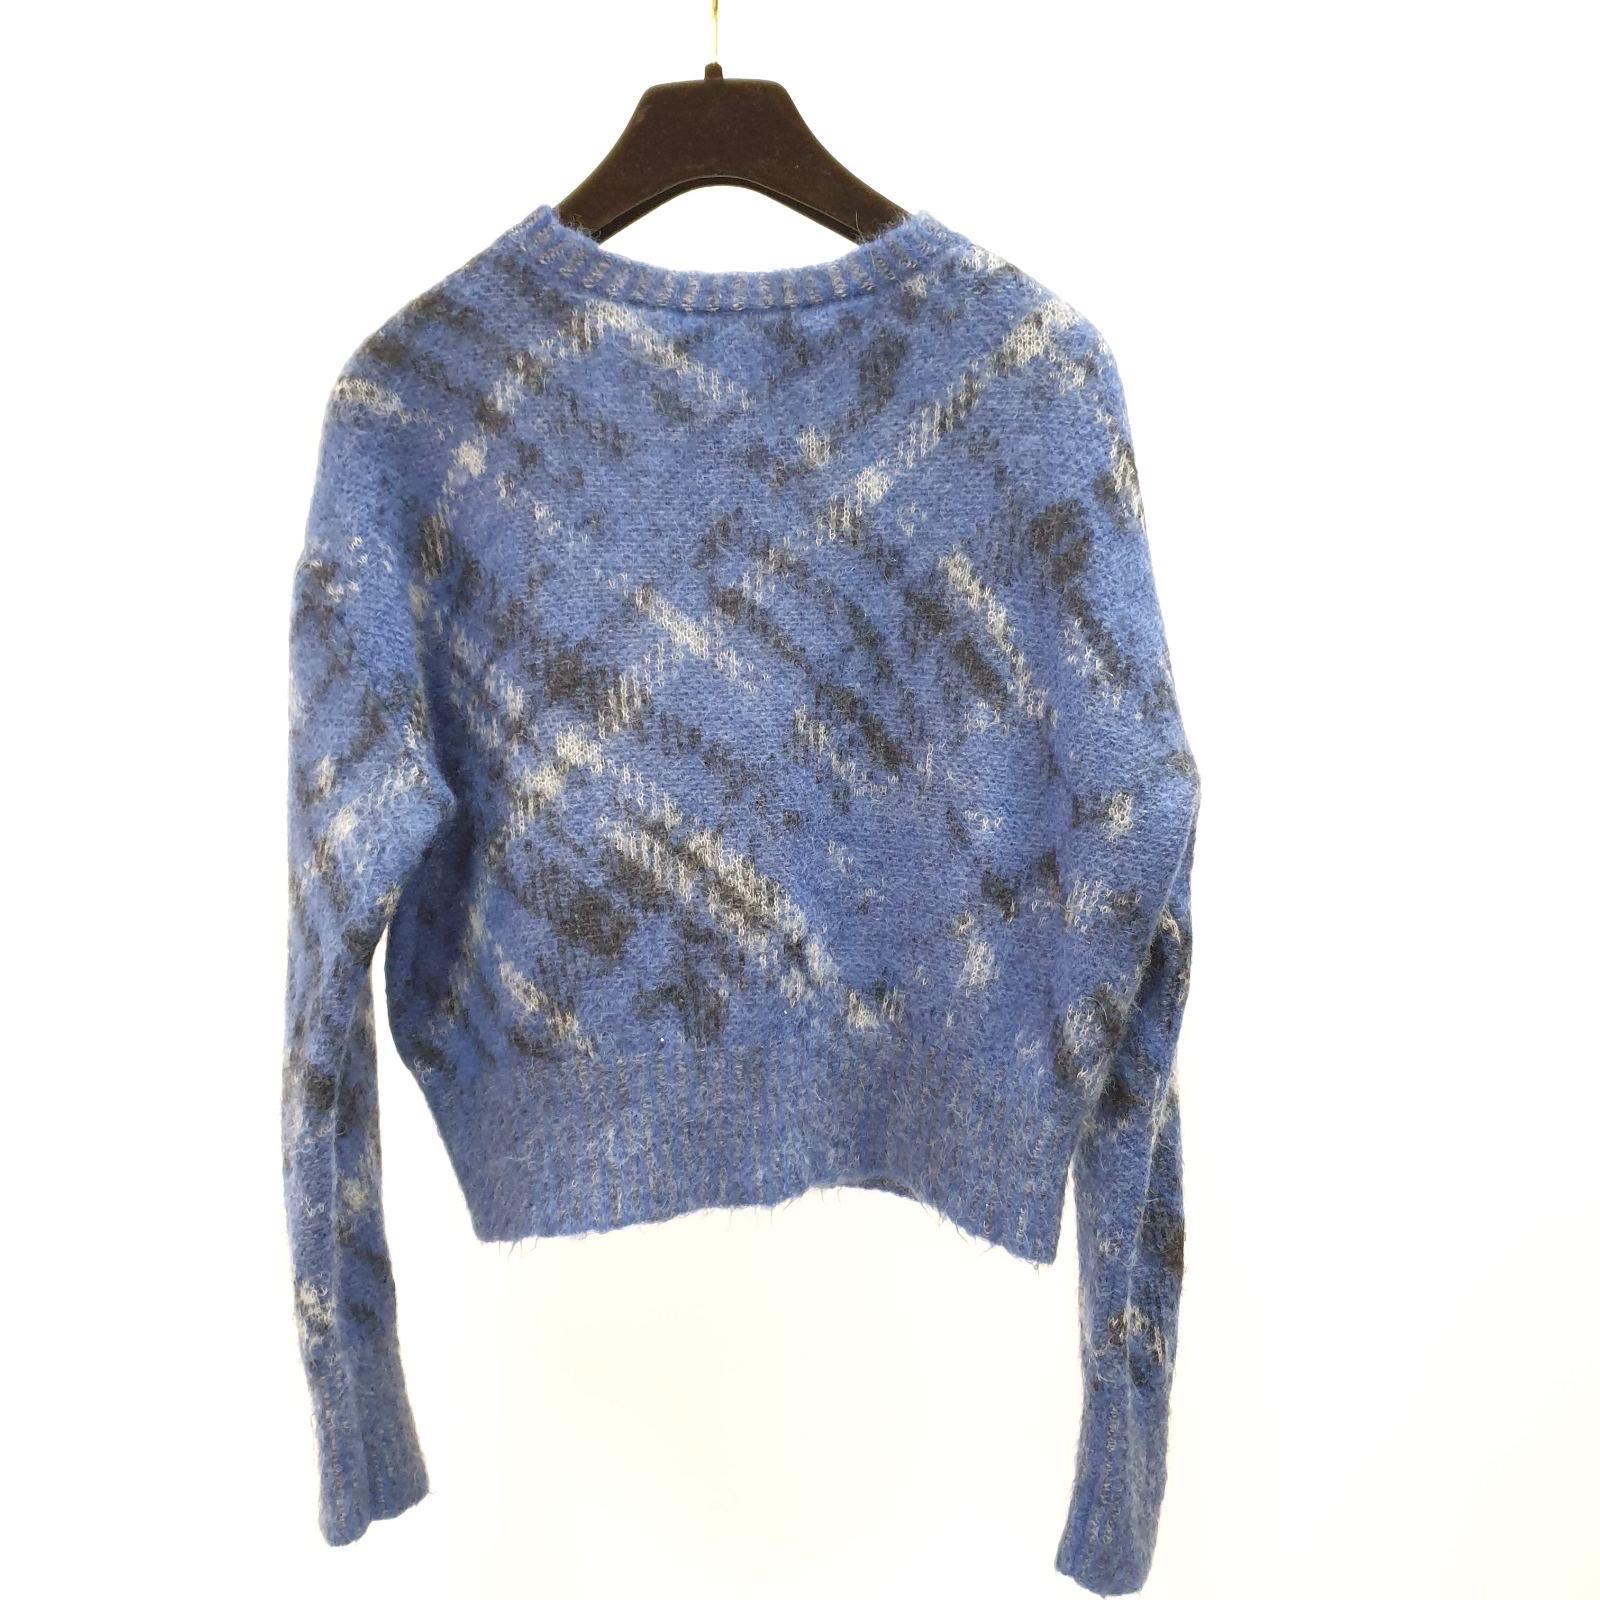 Est. Retail Price of $3,400.00

Unveiled at the Fall-Winter 2023-2024 fashion show, the sweater showcases the blue Check'n'Dior motif. Crafted in brushed technical mohair and alpaca knit, it is distinguished by a short silhouette that highlights the